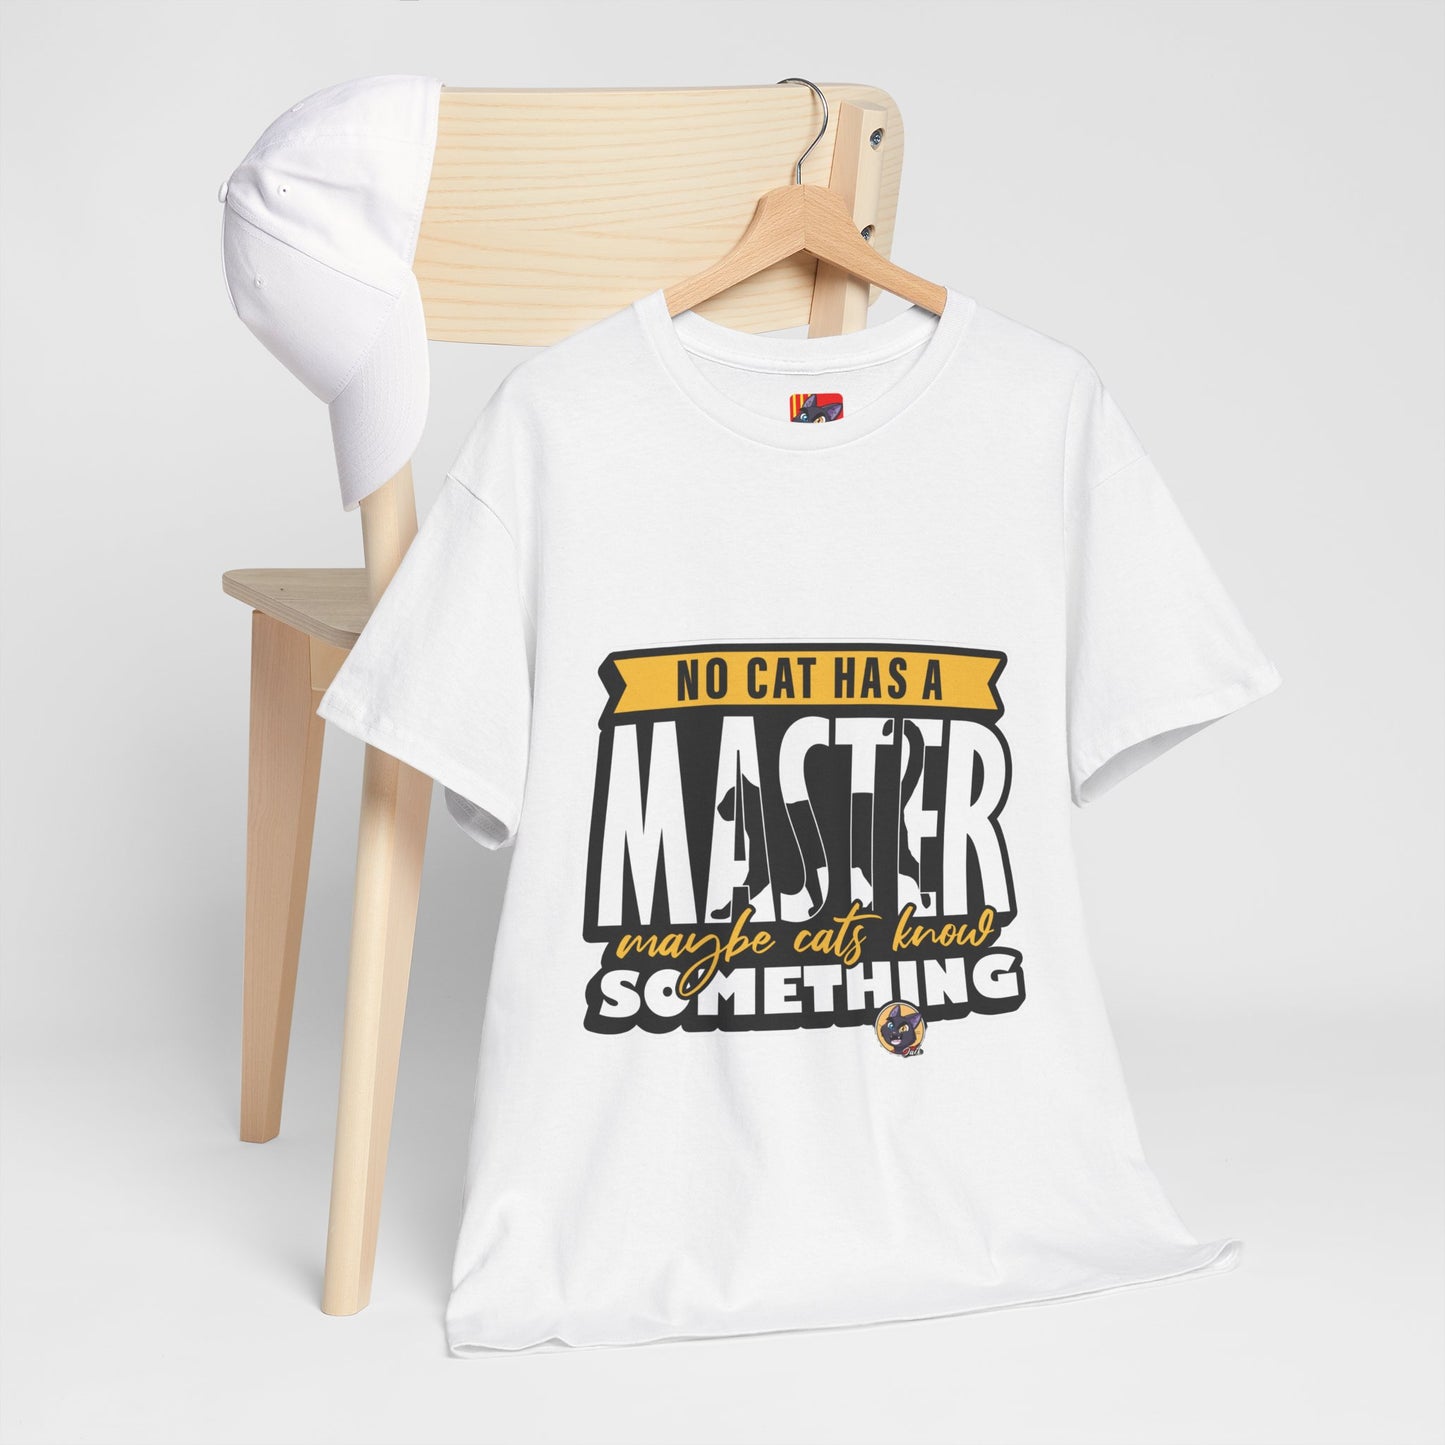 The Deep Secret T-Shirt: No cat has a master maybe cats know something Jack